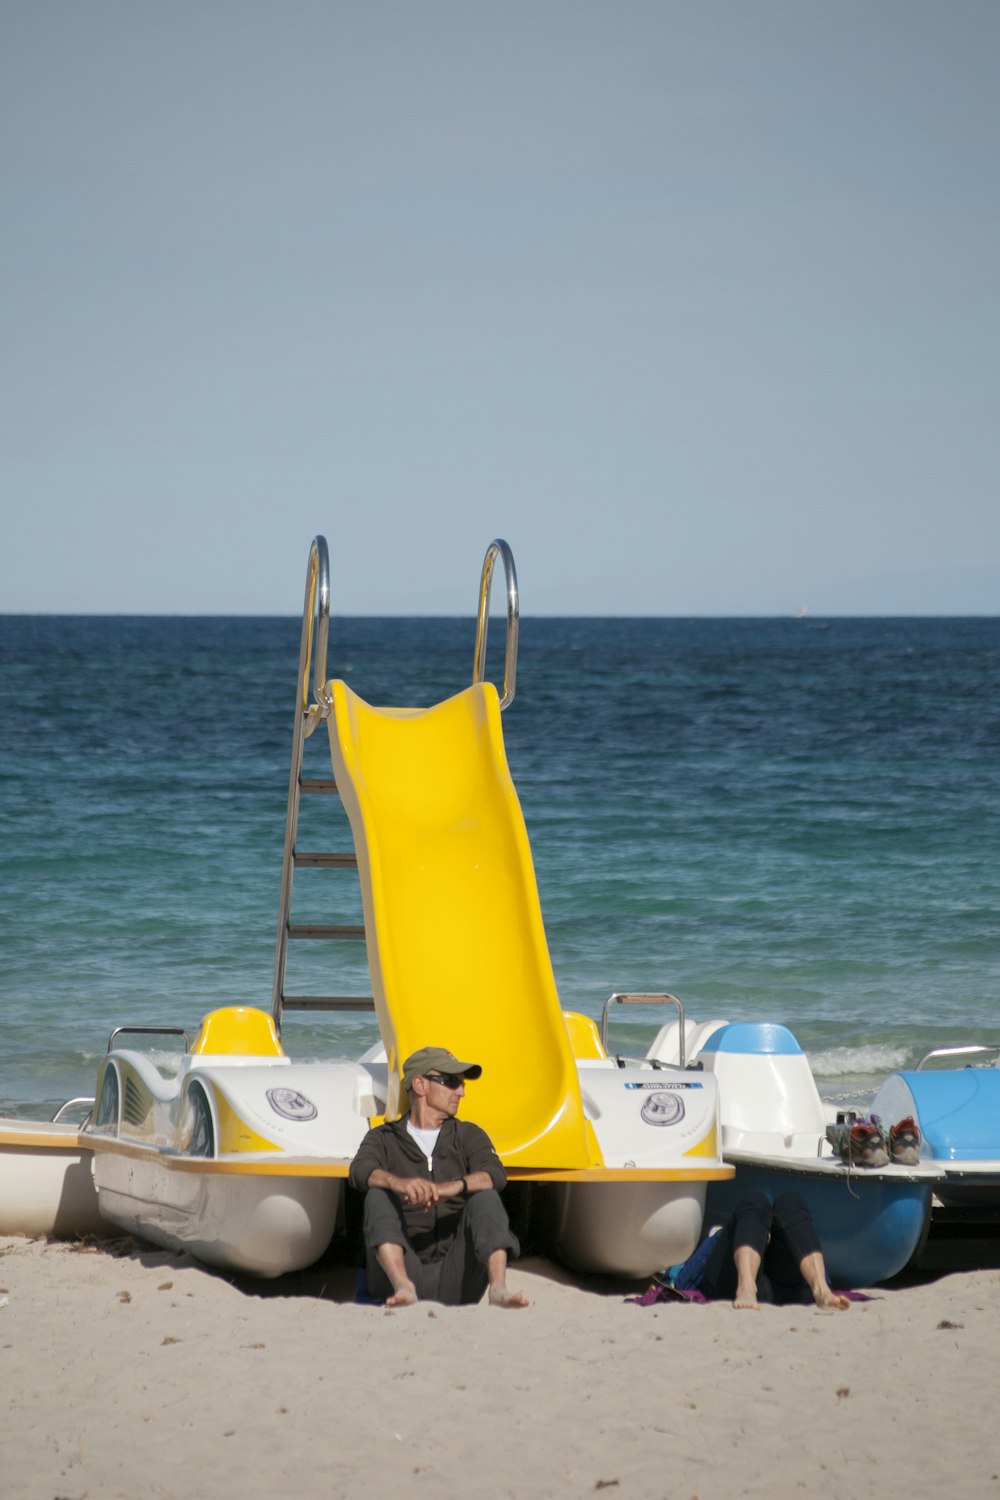 man sitting and leaning on white and yellow boat viewing blue body of water